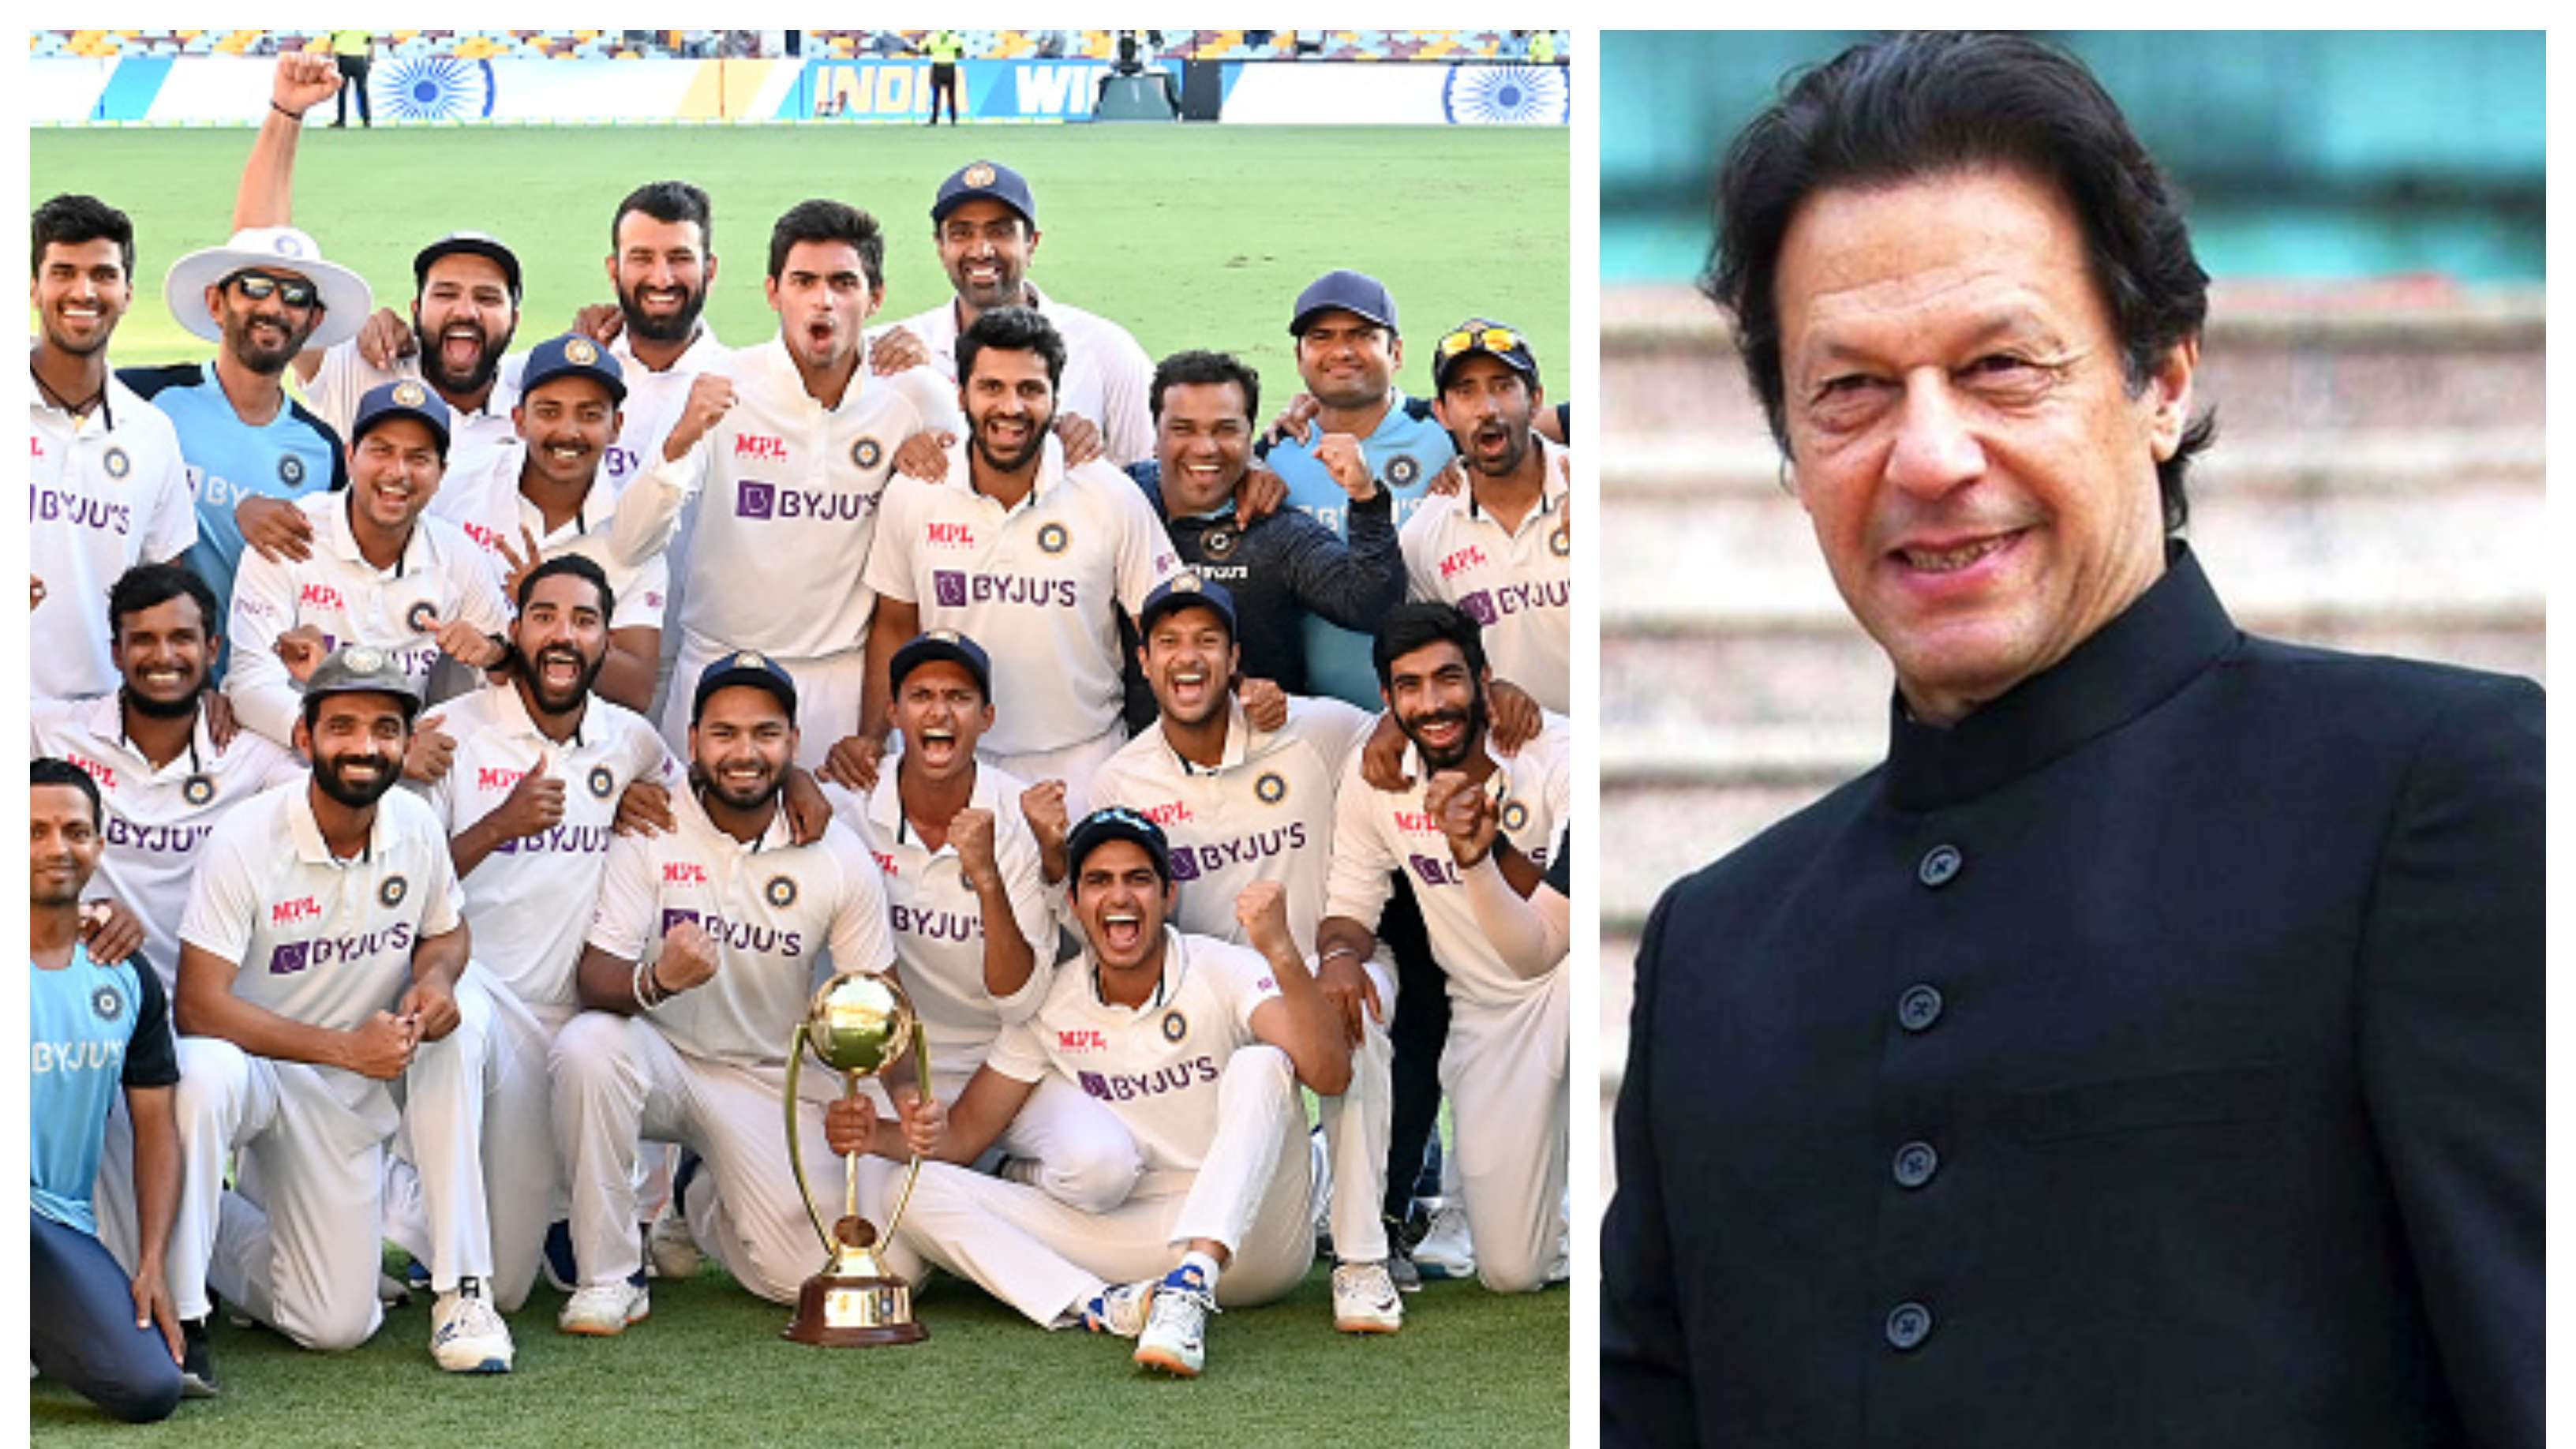 ‘India became a top team due to improved cricket structure’: Pakistan PM Imran Khan